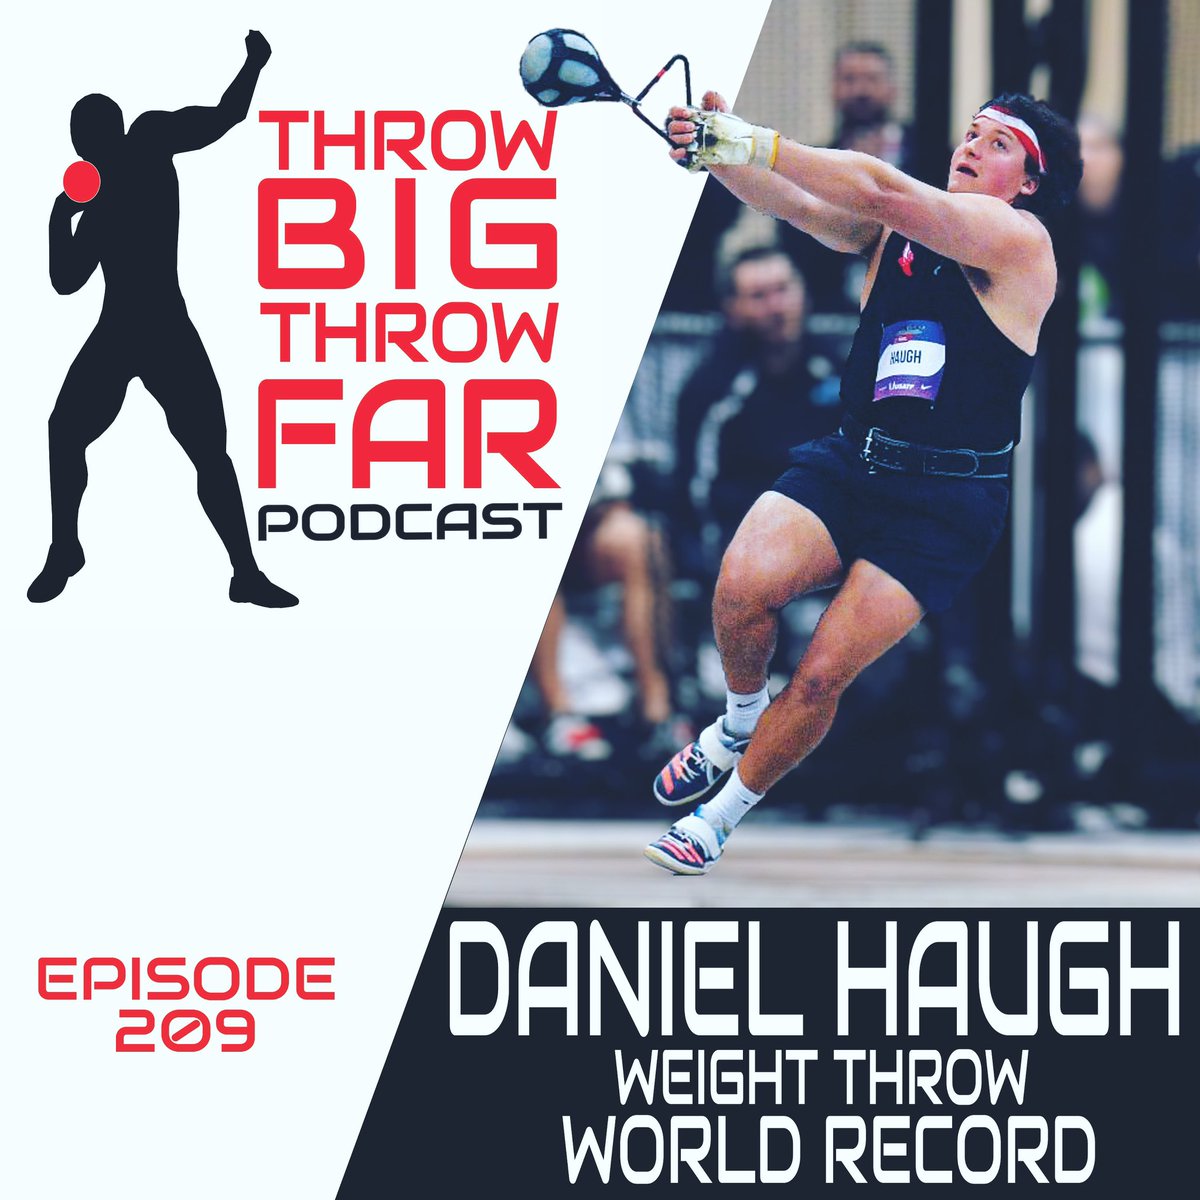 World Record Holder Daniel Haugh talks about the work ethic it took to get to where he is today and where he wants to go in the future! podcasts.apple.com/us/podcast/thr…